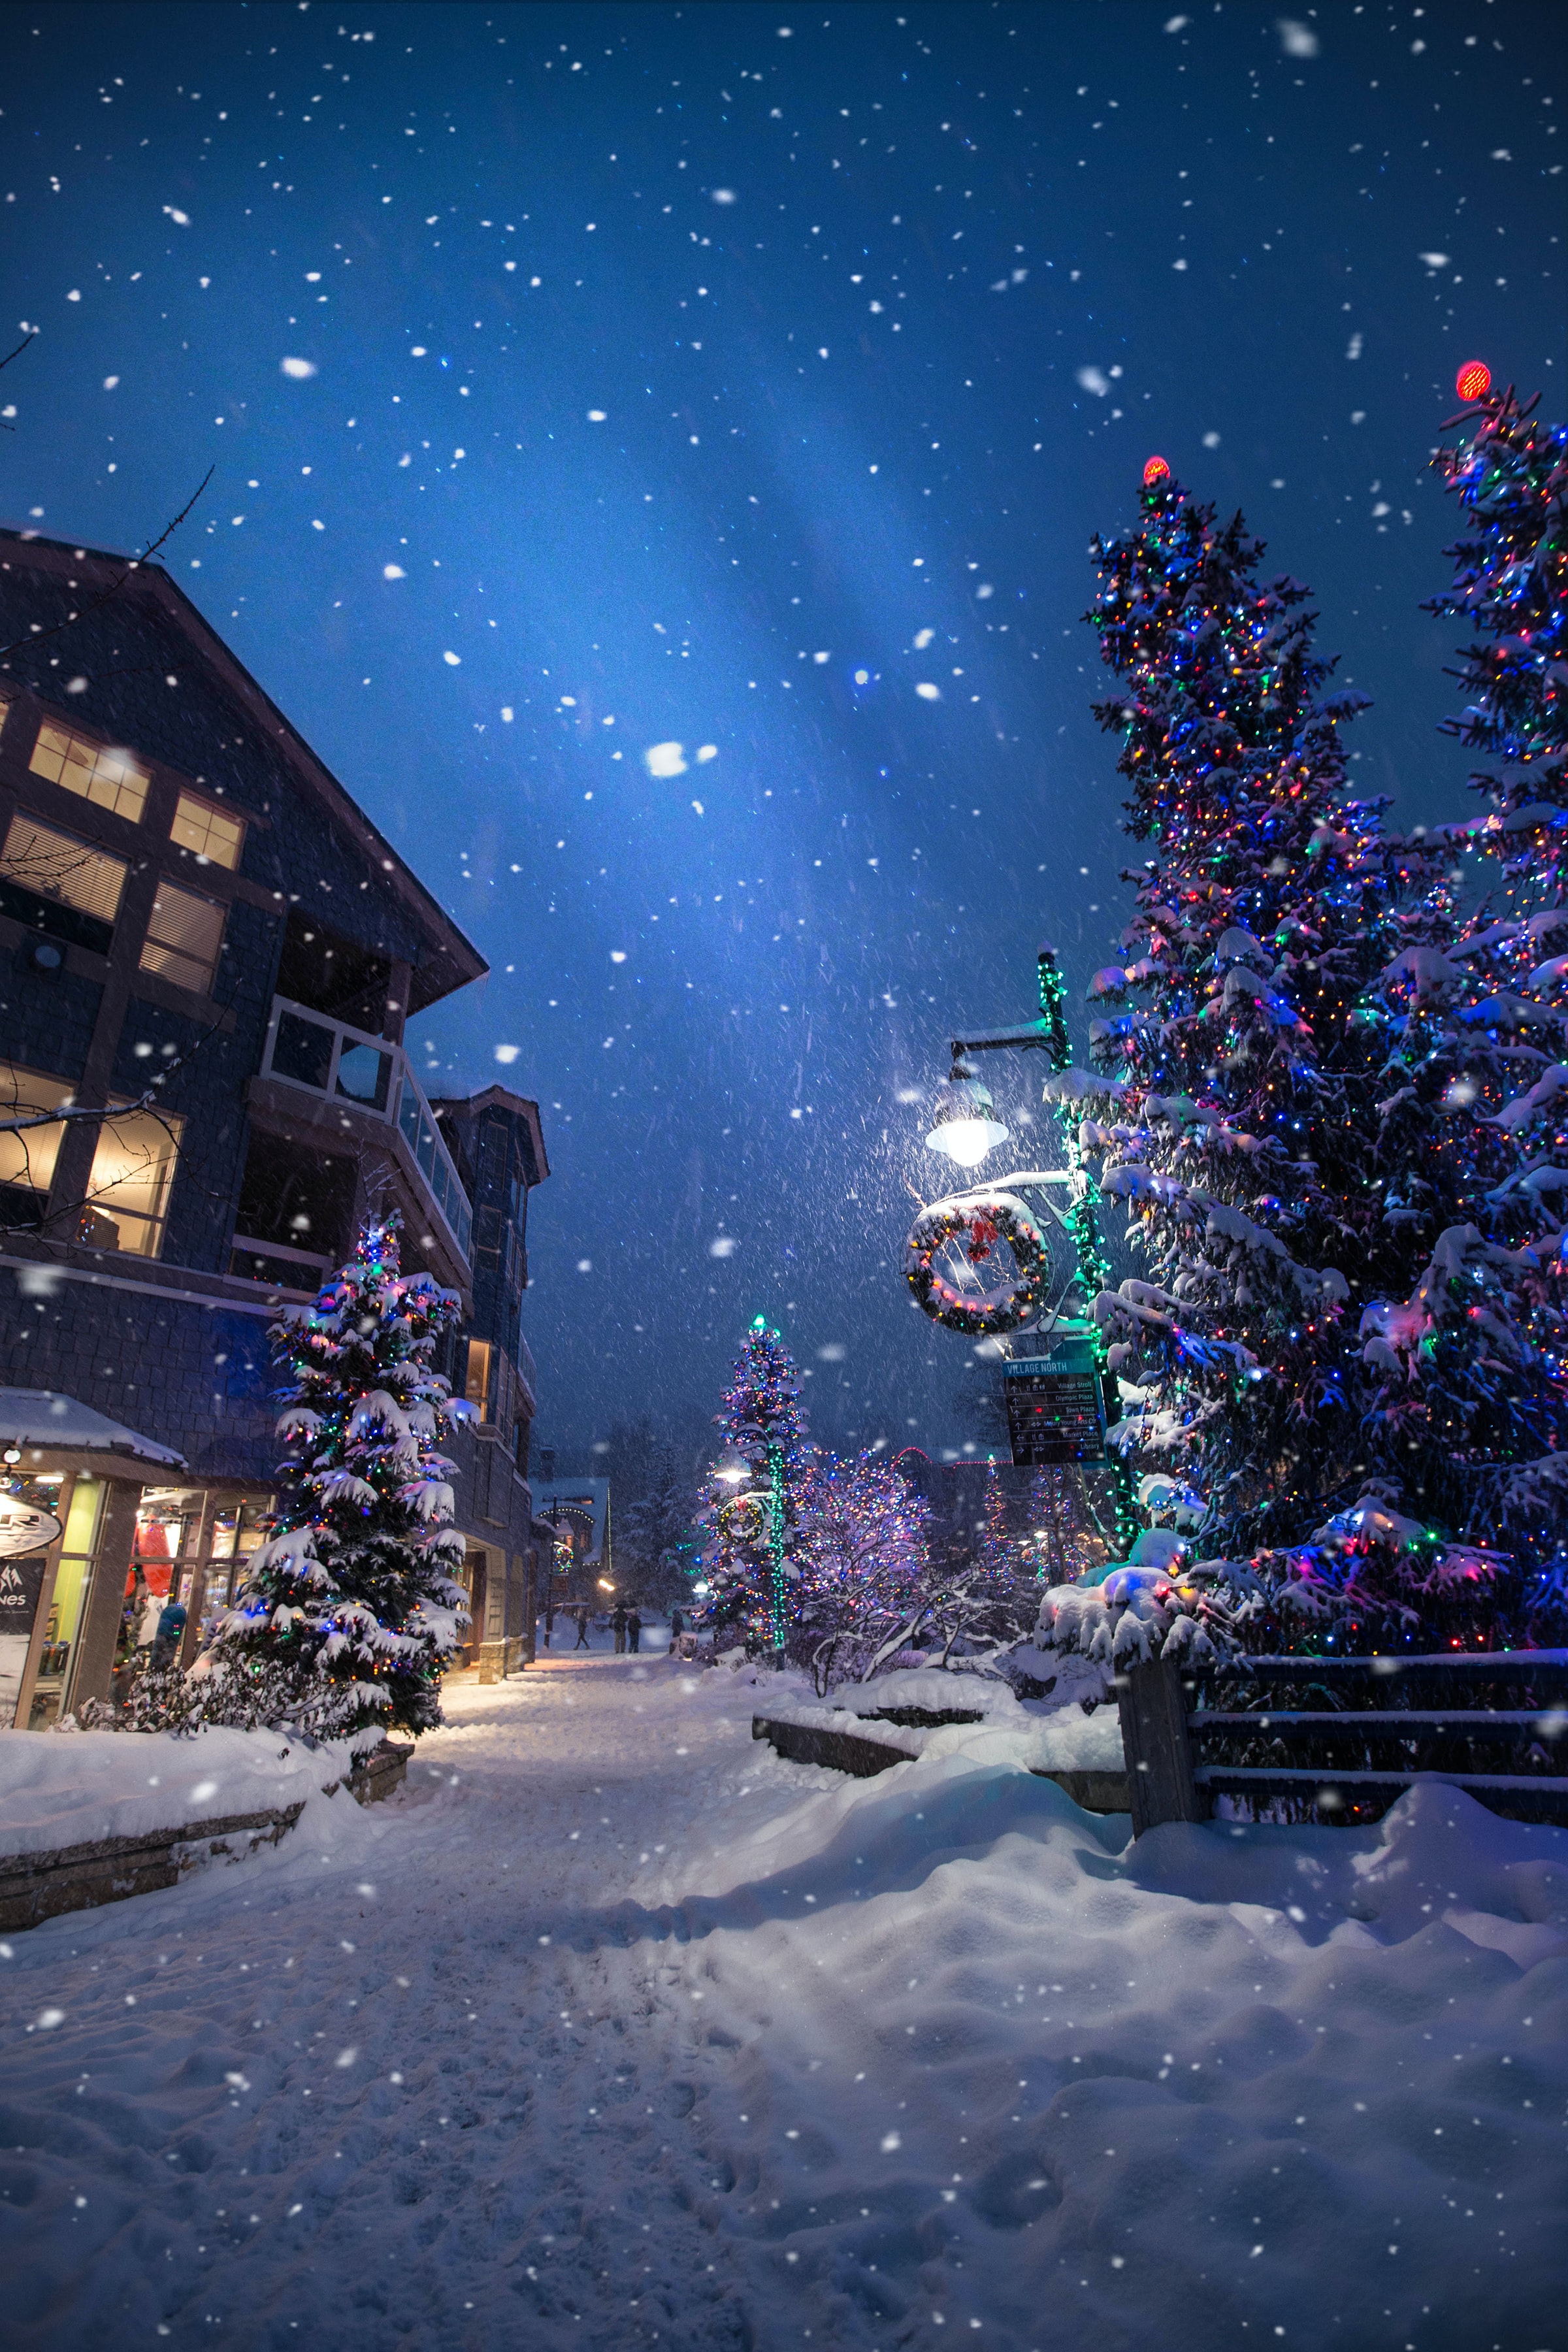 Whistler village in the evening